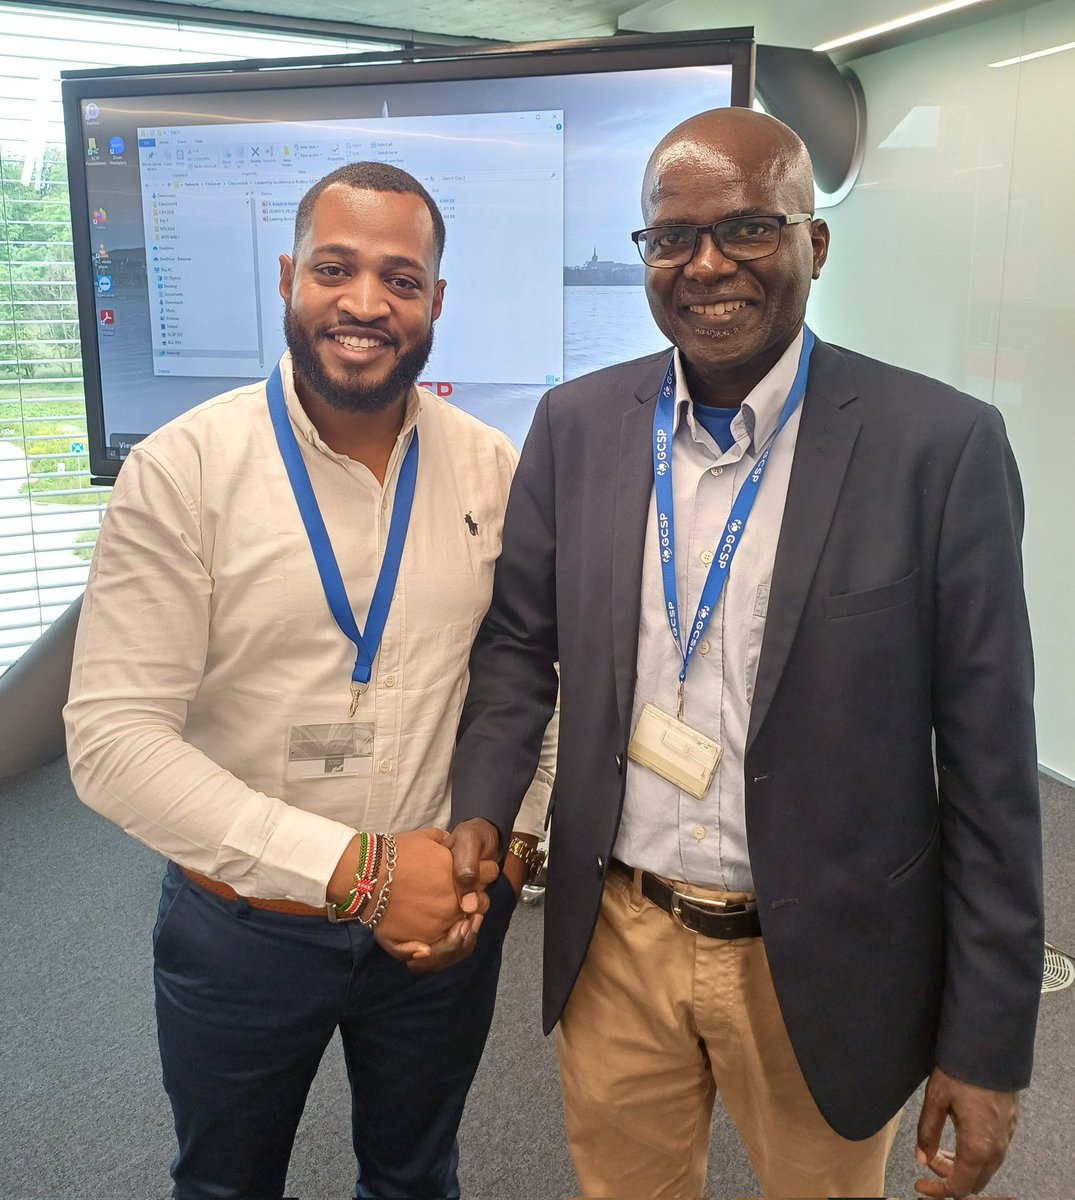 Had a fantastic conversation with HE Gervais @grufyikiri, former Vice President of Burundi, about the critical role of ethics in leadership and the true cost of ethical leadership. #LeadershipExcellenceInPolitics